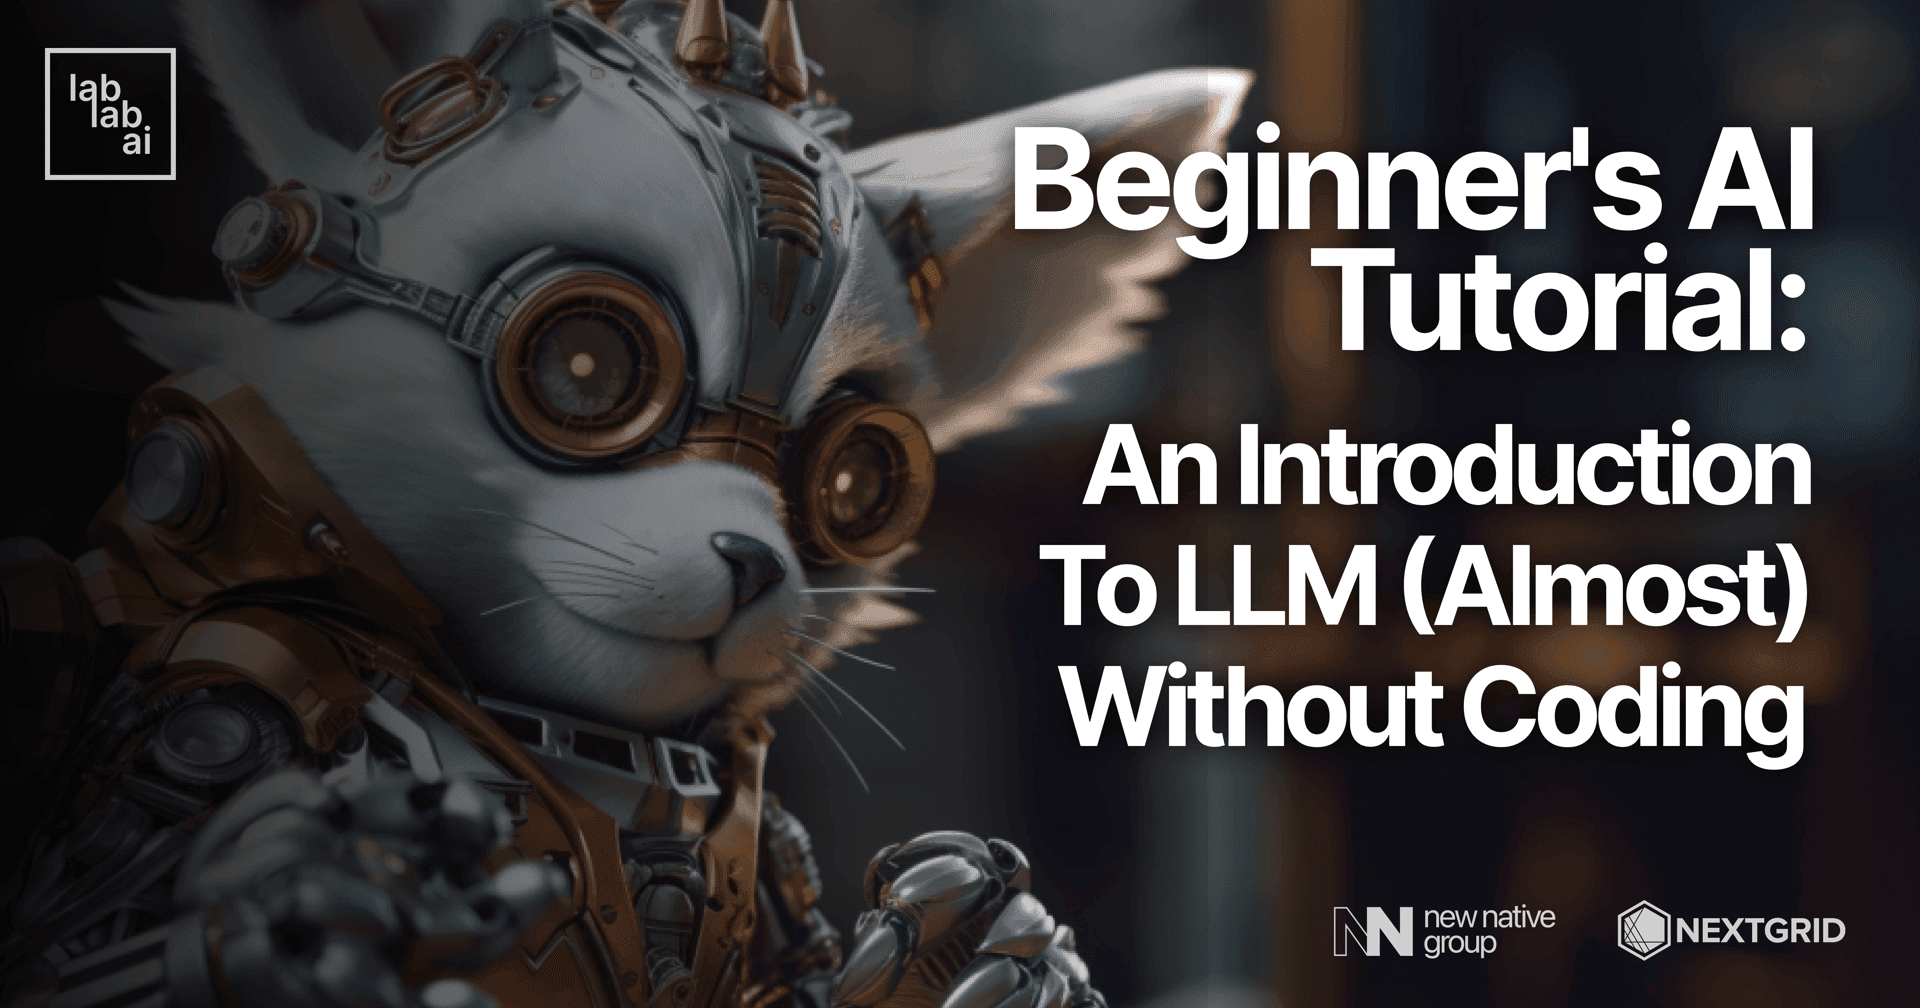 Beginner's AI tutorial: an introduction to LLM (almost) without coding